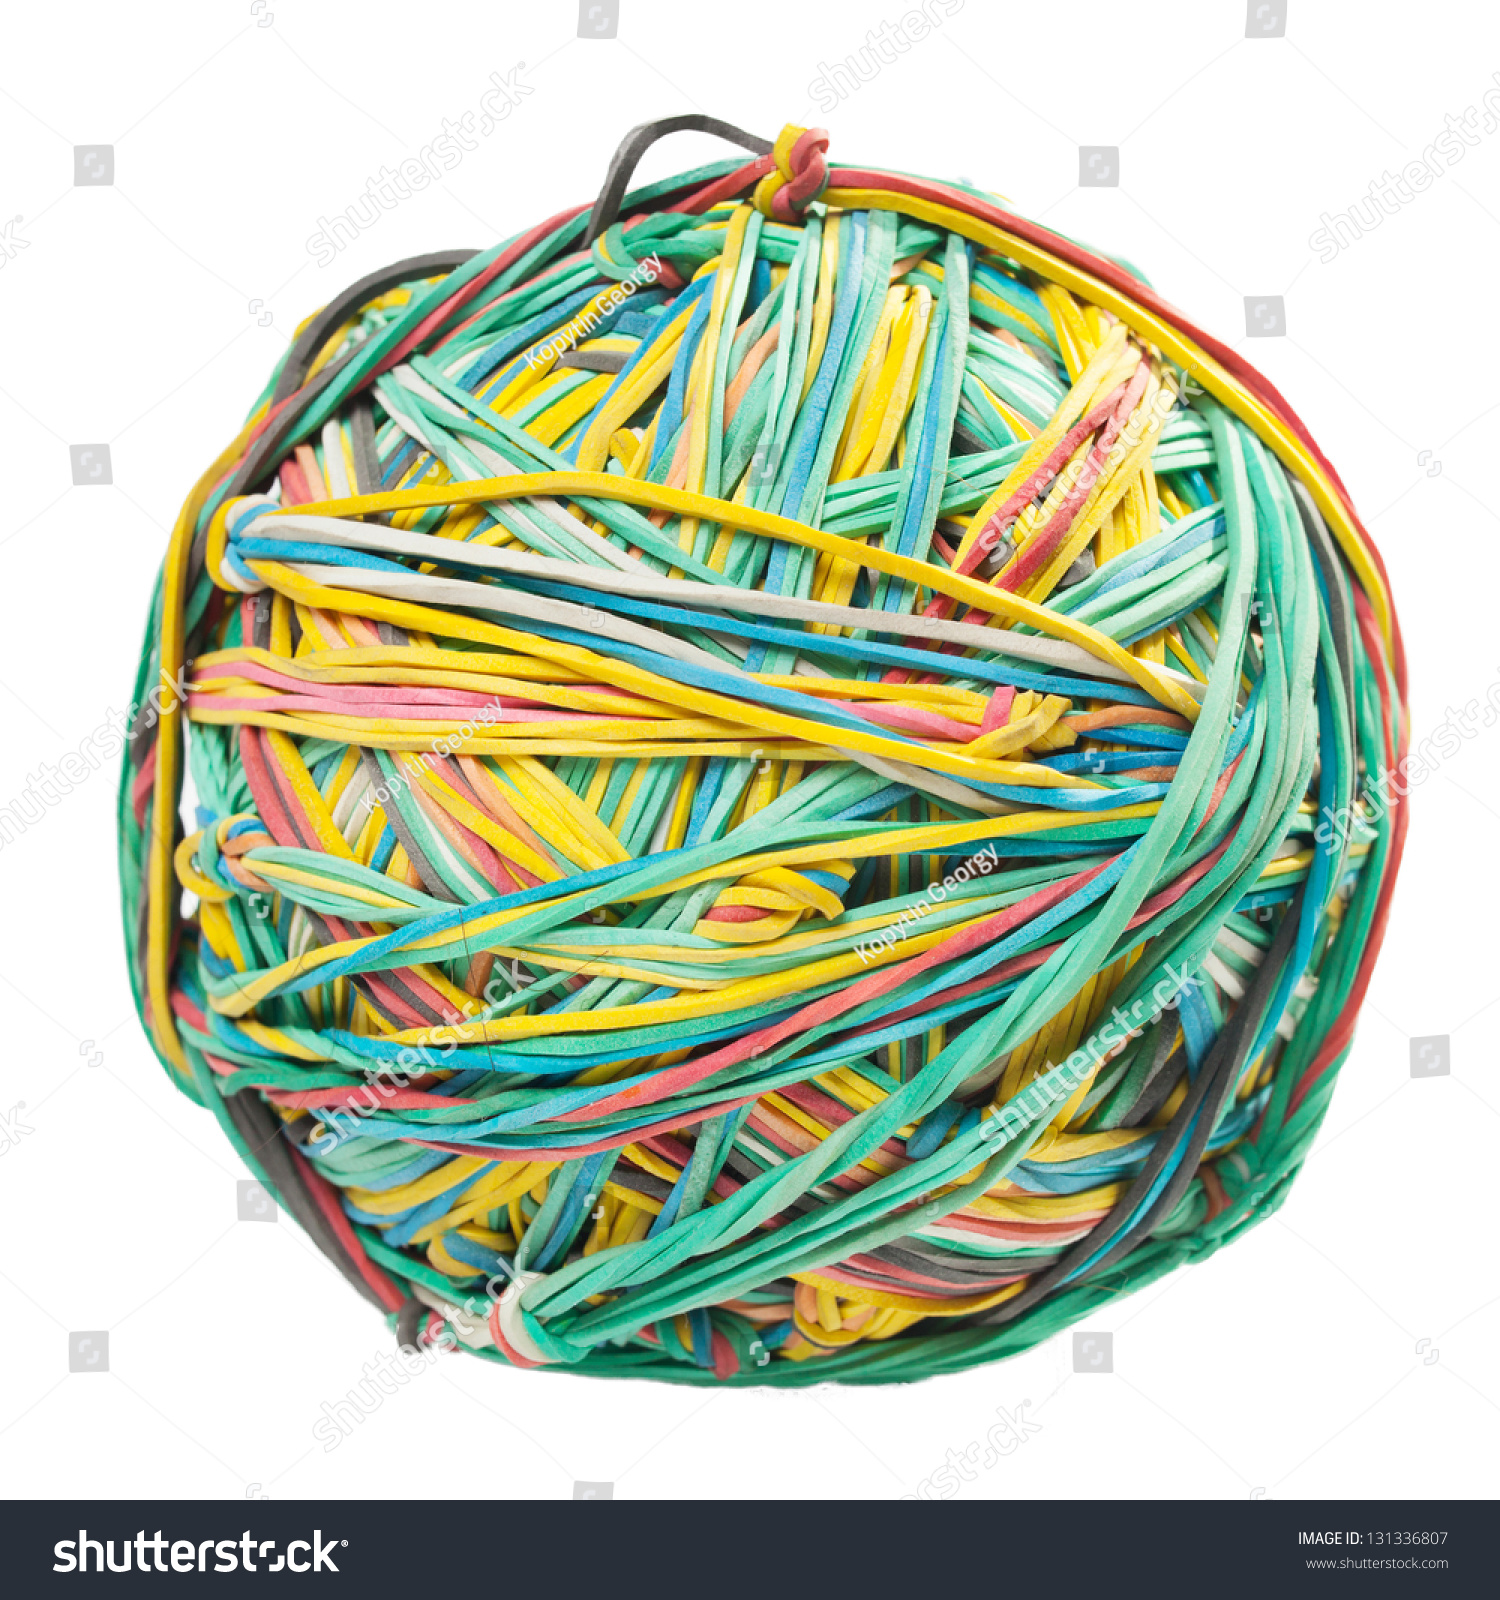 large white rubber bands